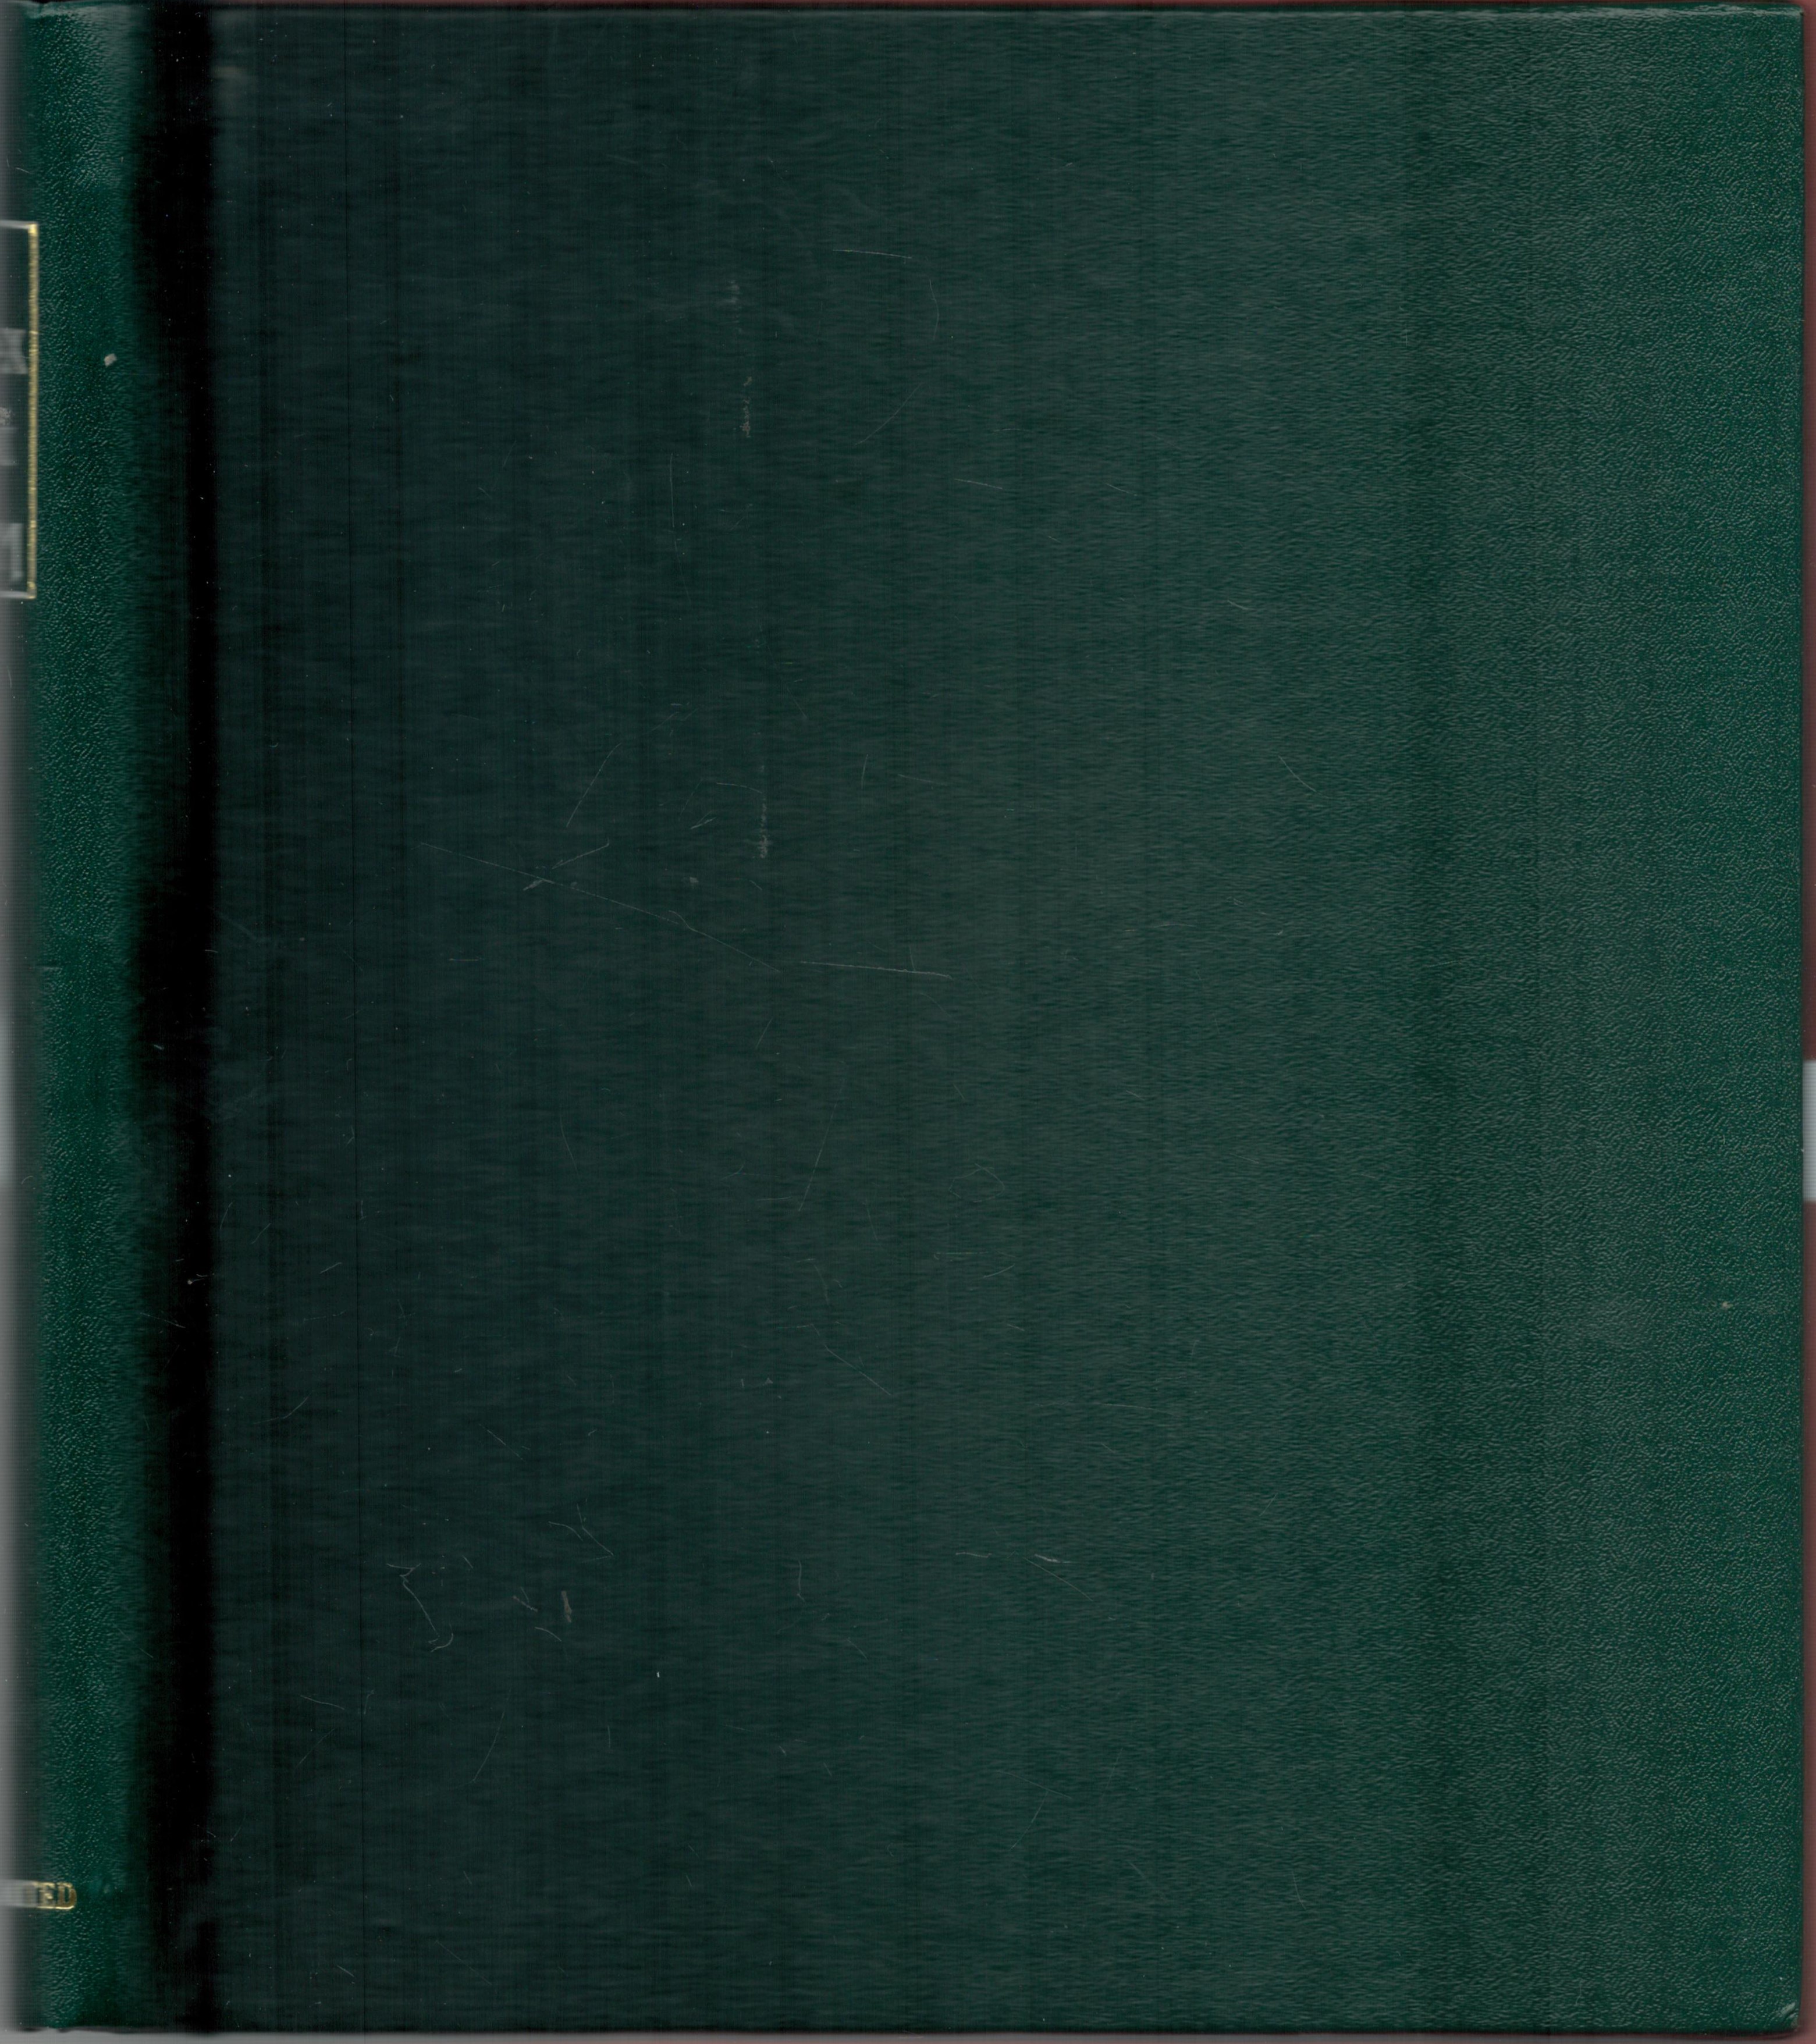 Stanley Gibbons collectors, lovely green stamp album. Empty and is perfect for storage of stamps and